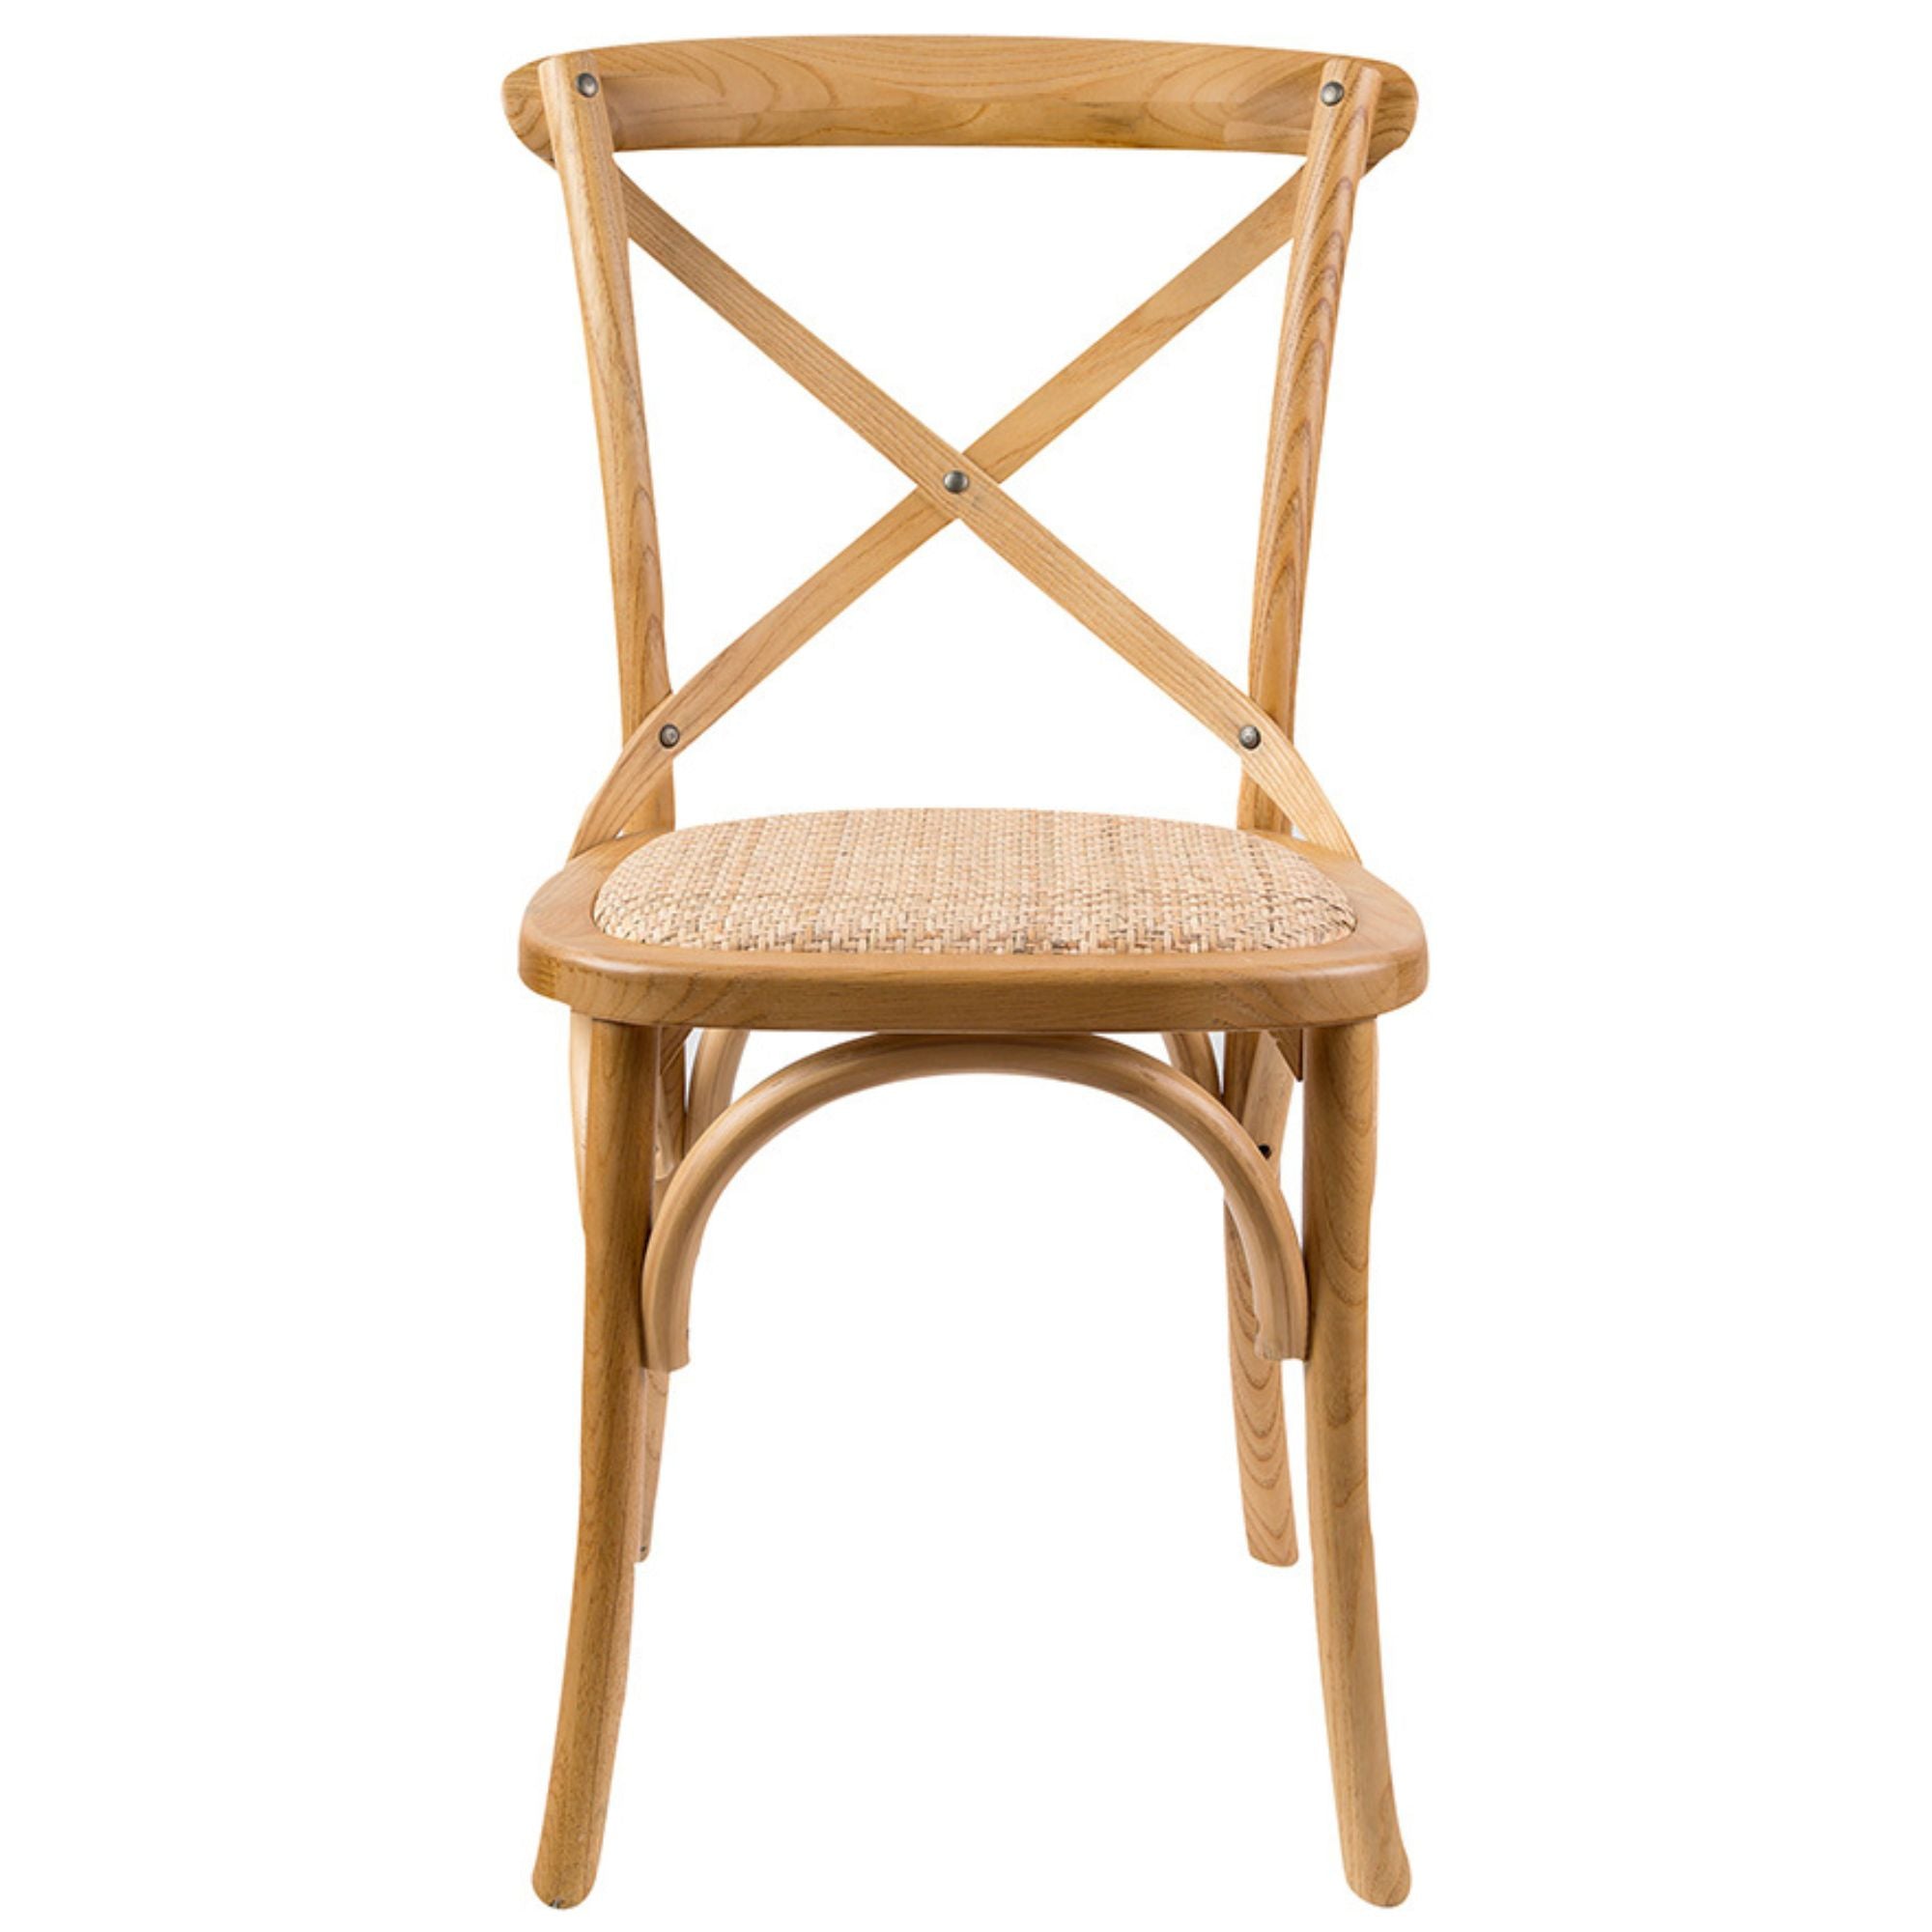 Crossback Dining Chair Set Of 6 Solid Birch Timber Wood Ratan Seat - Oak